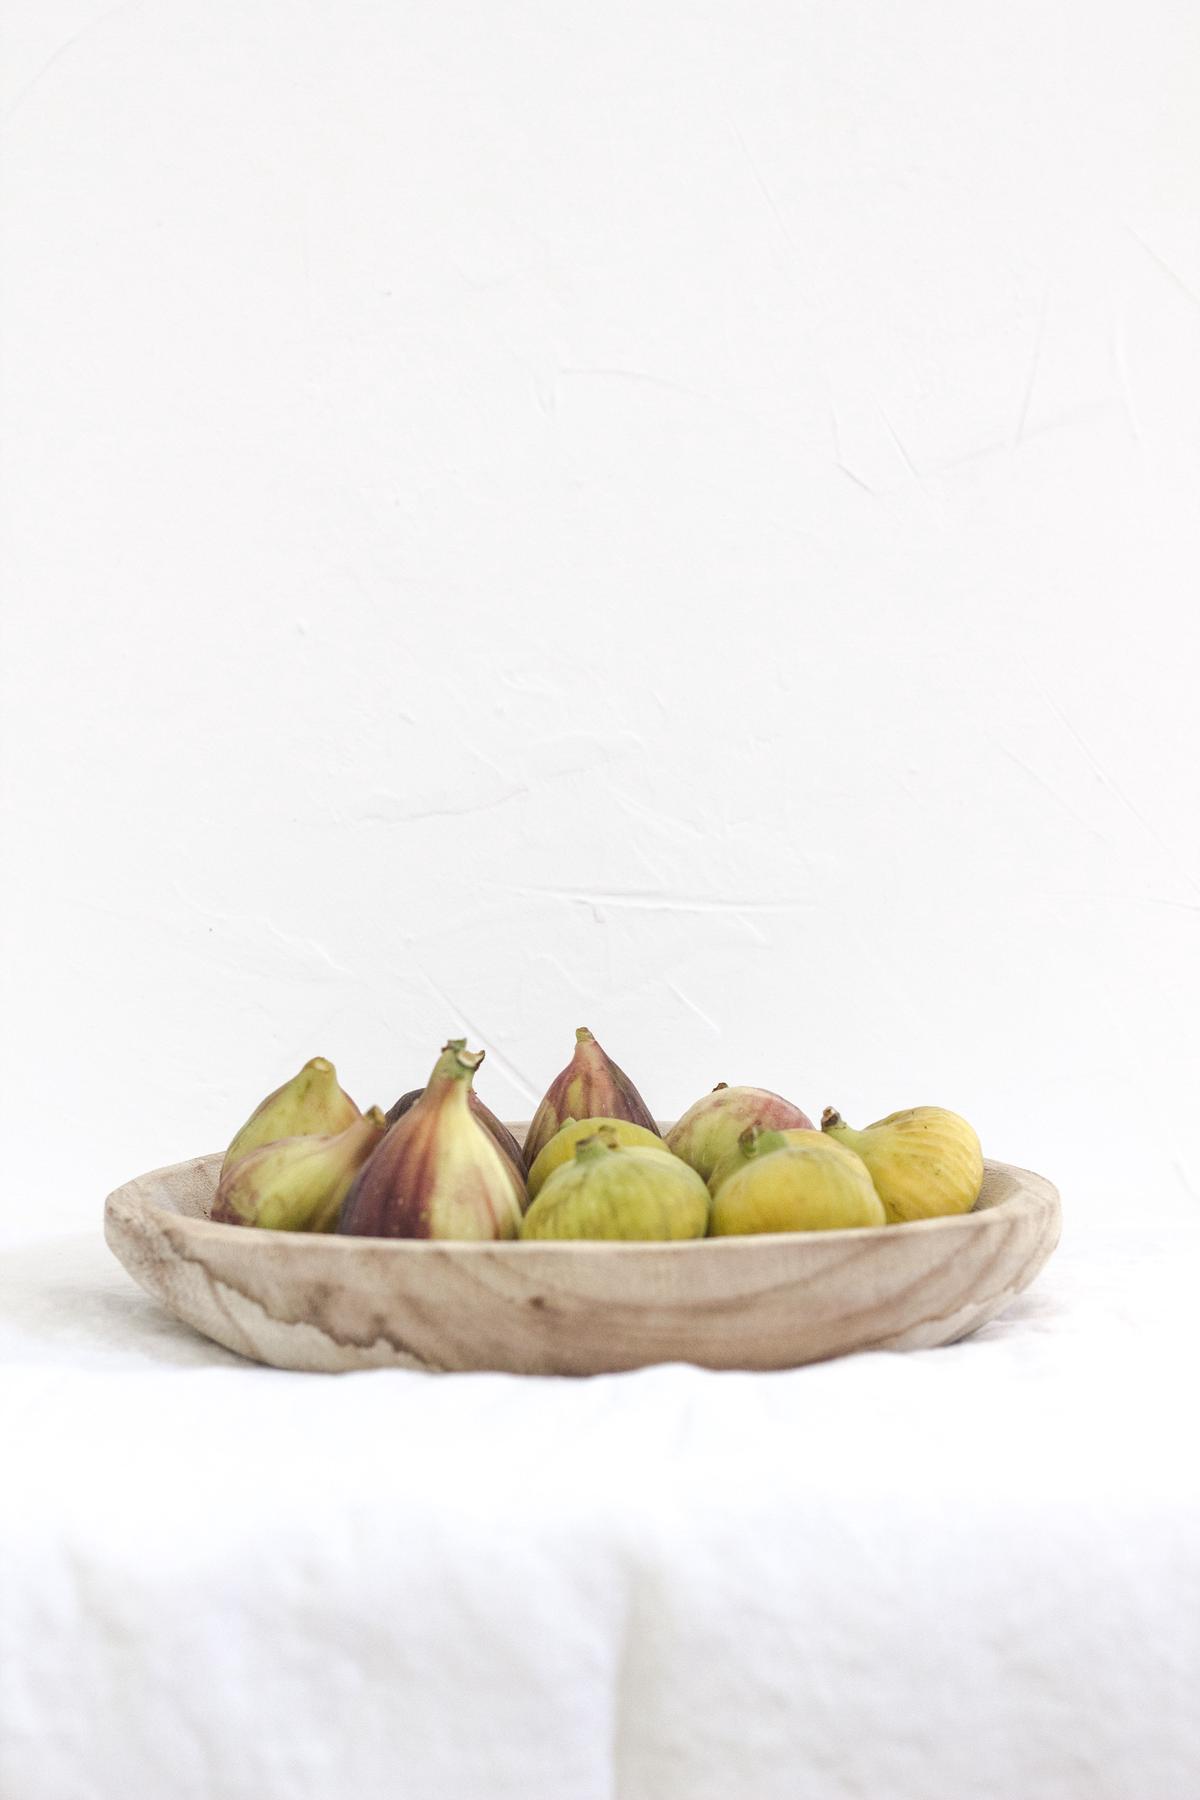 A guide that shows the various stages of ripeness in figs, from green to deep purple to brown